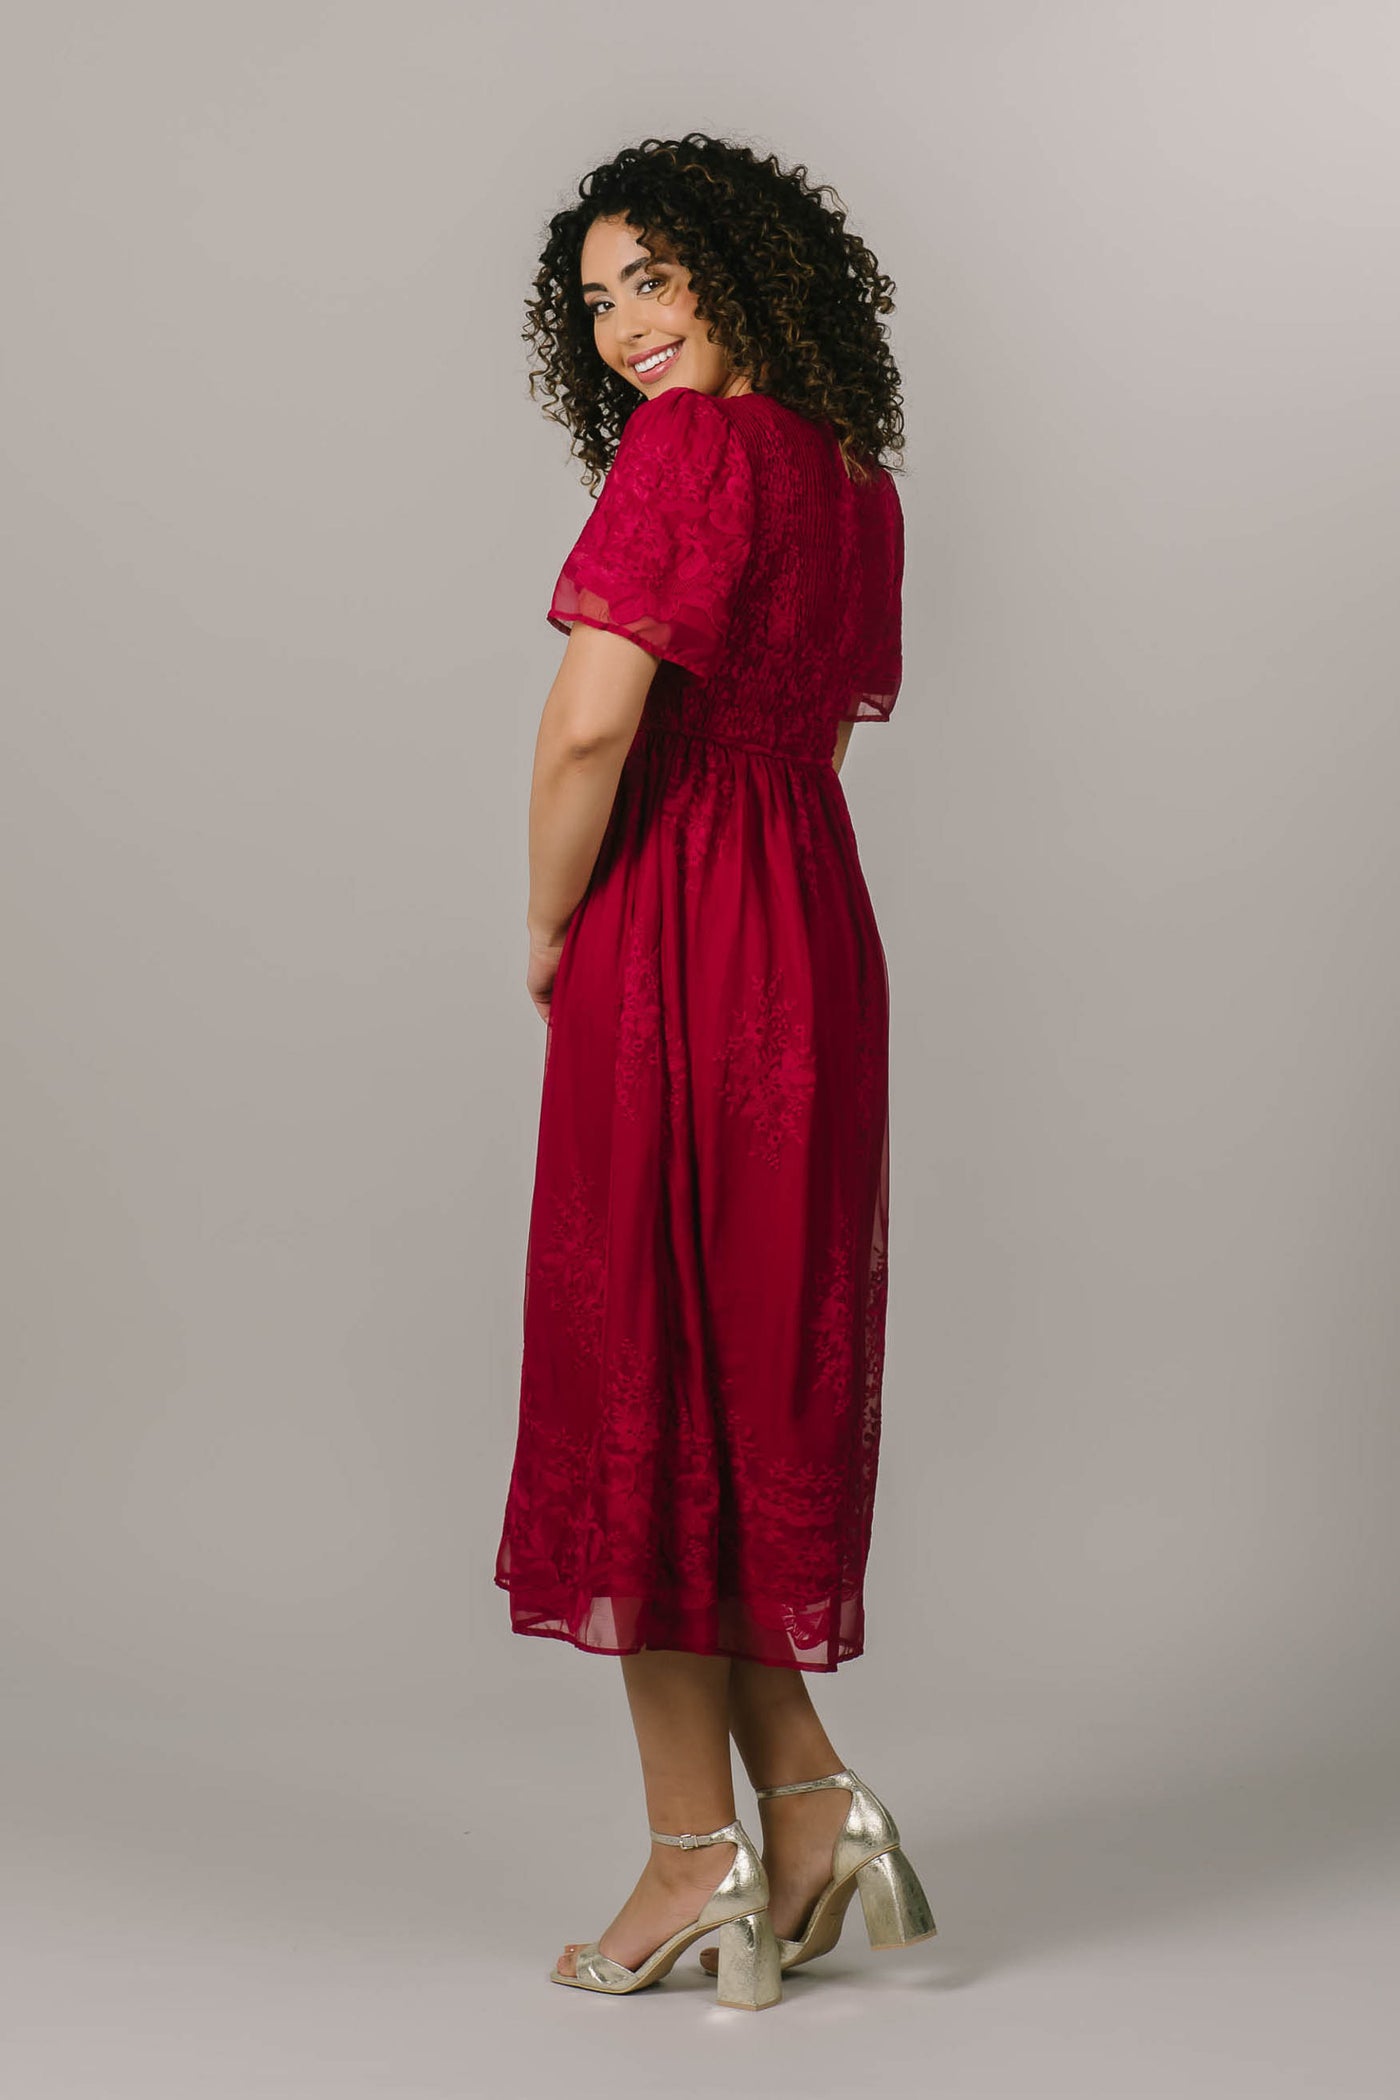 This modest dress is a bright magenta color, has embroidered flowers, and is a midi length.